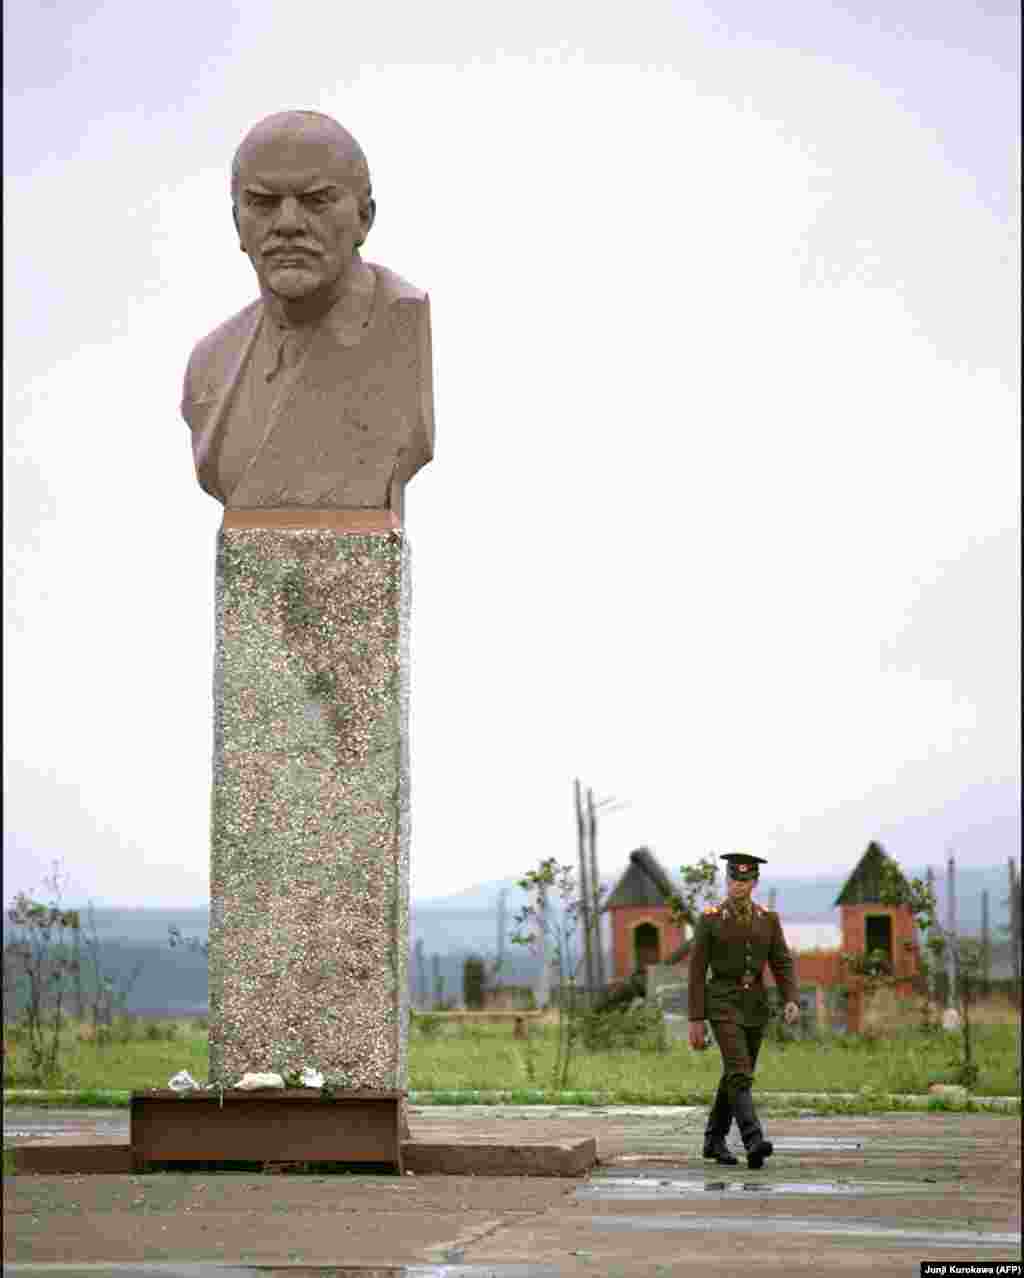 Kunashir, Russia: A photo from 1989 of the Lenin monument that still stands on one of the islands of the Kurile chain that is claimed by Japan but remains in Russian control.